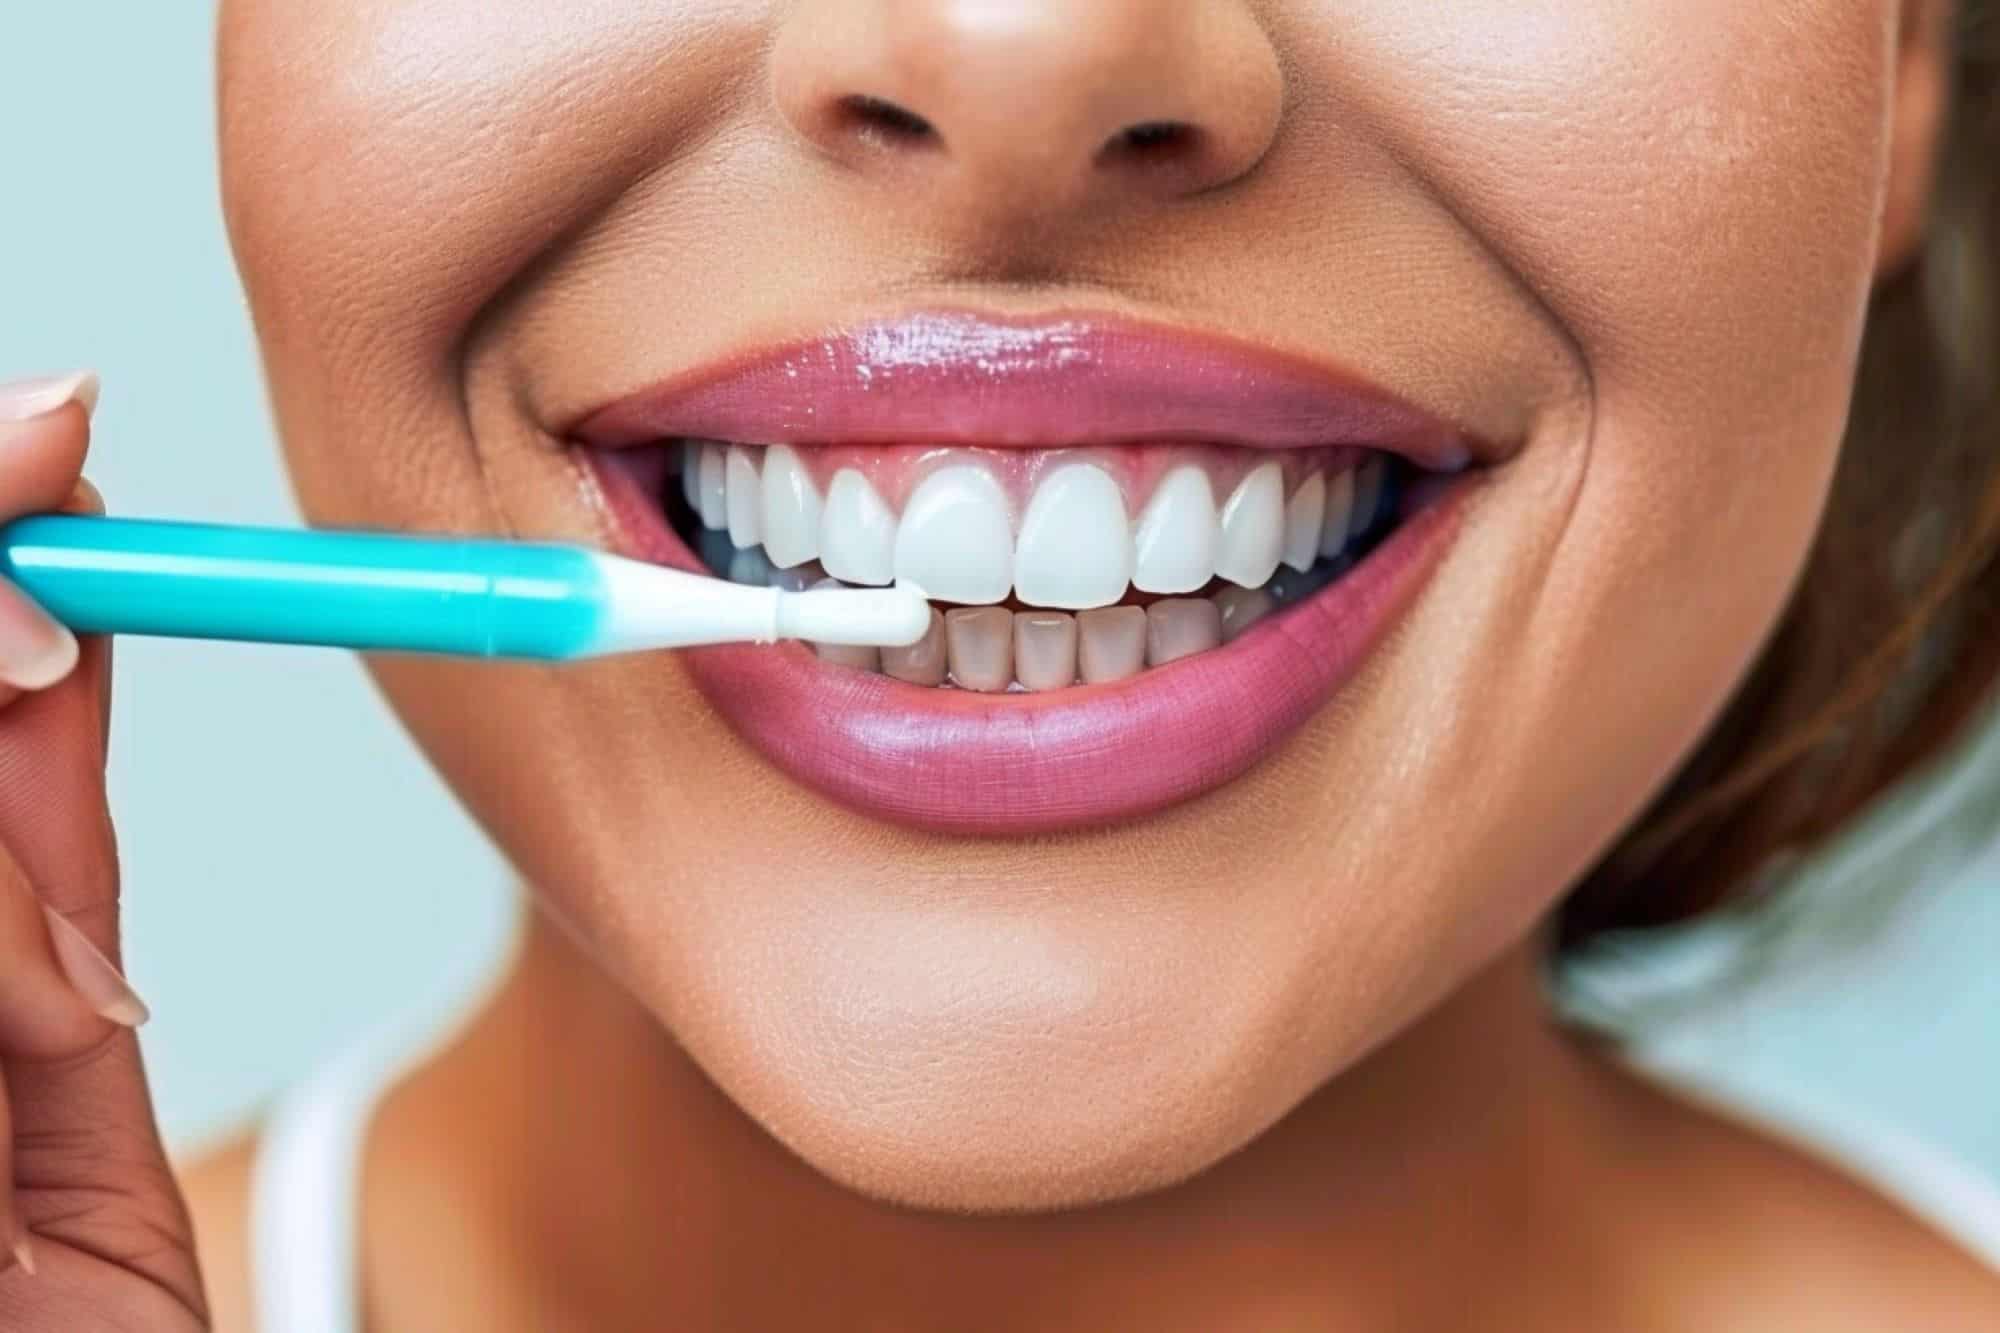 a woman is smiling and holding a teeth-whitening pen